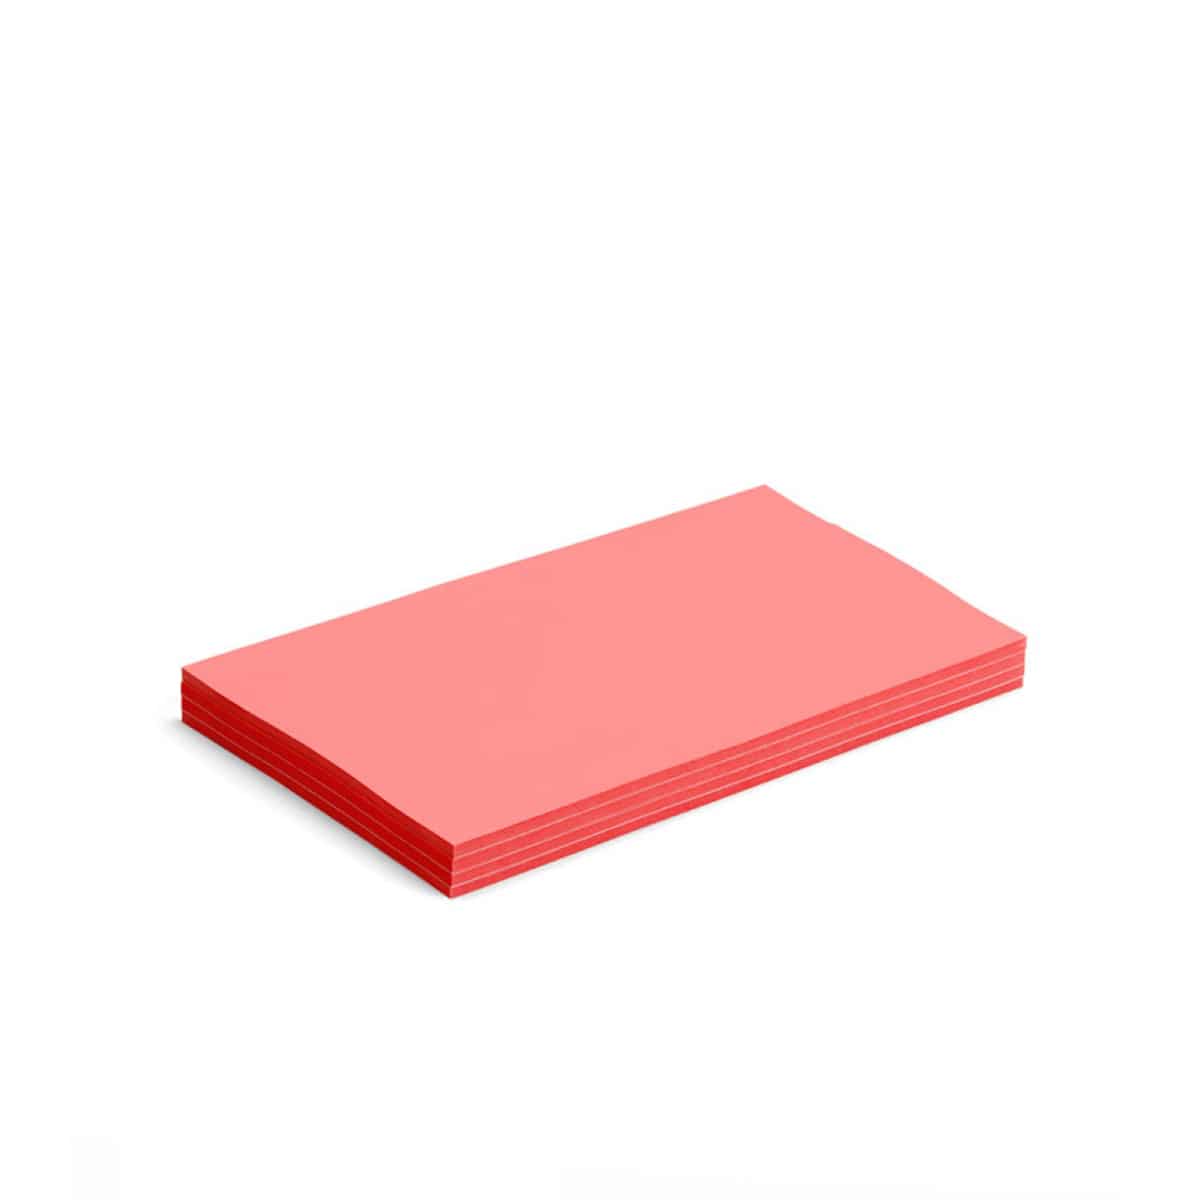 Stick- It Cards, large rectangular, 100 sheets, single colors- 2 rot